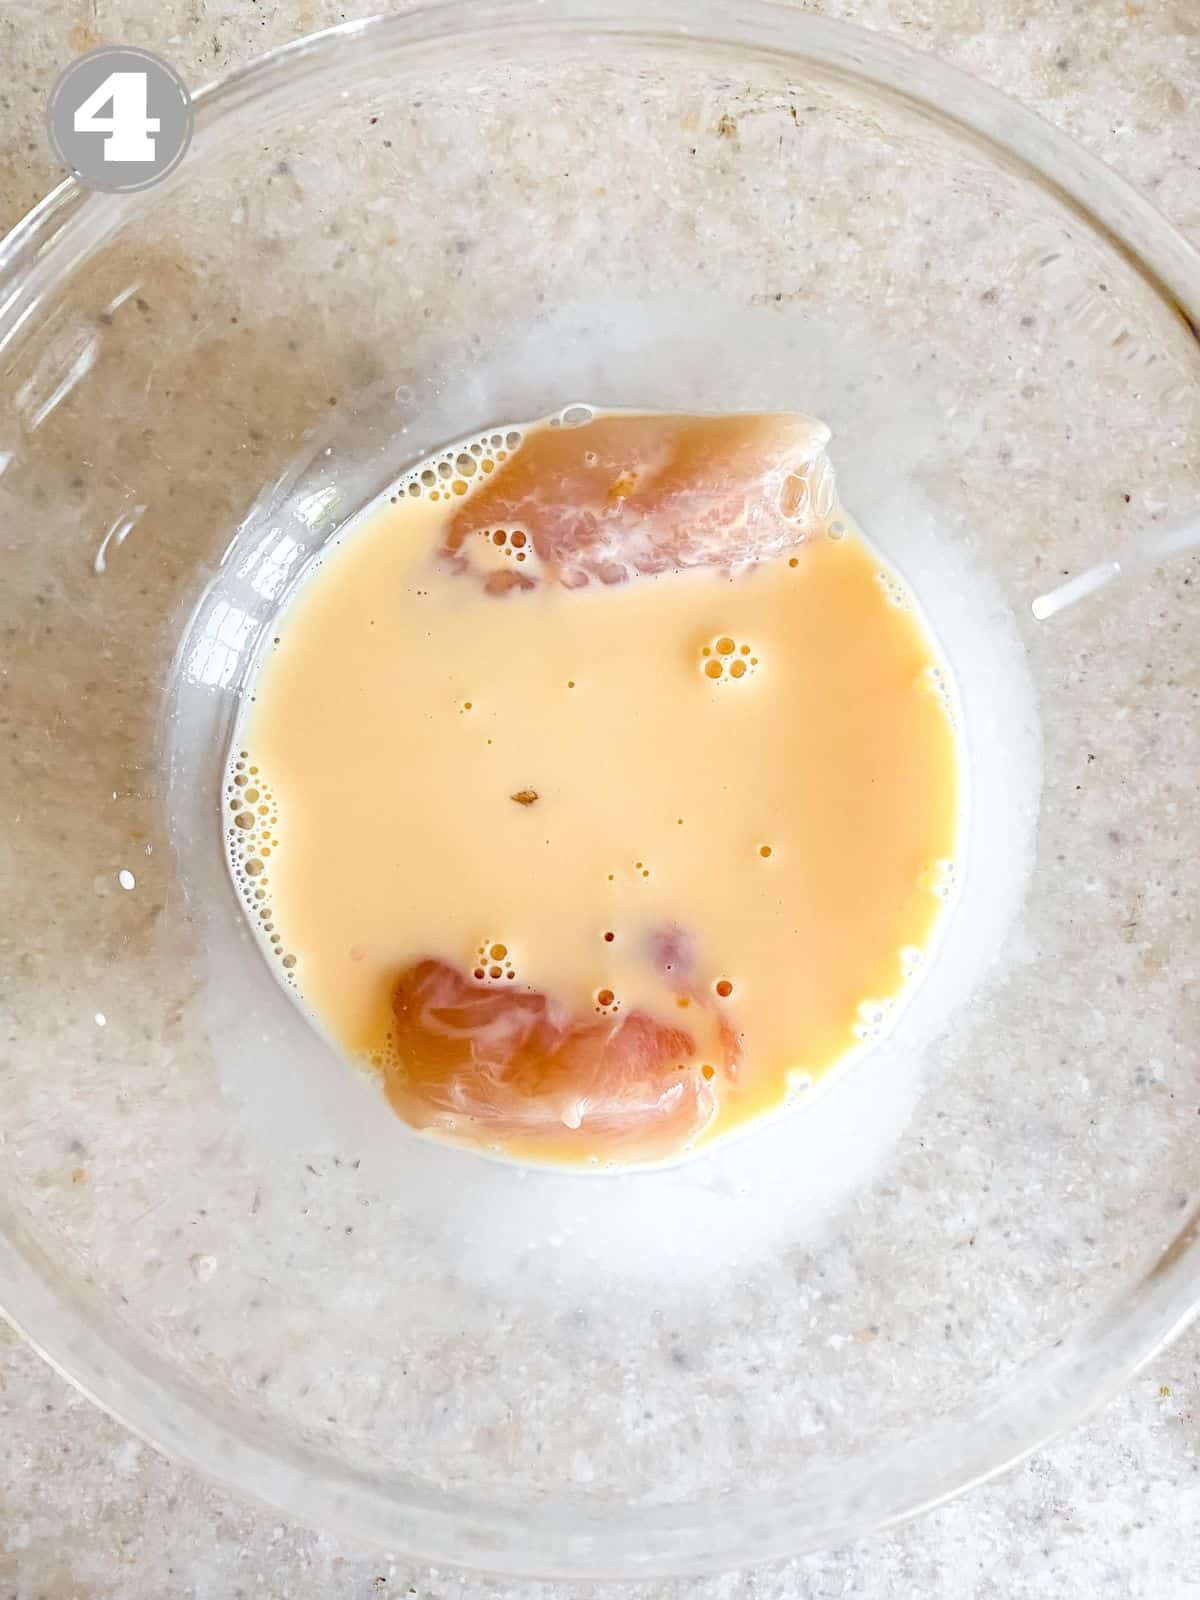 chicken breast in egg wash in a glass bowl.